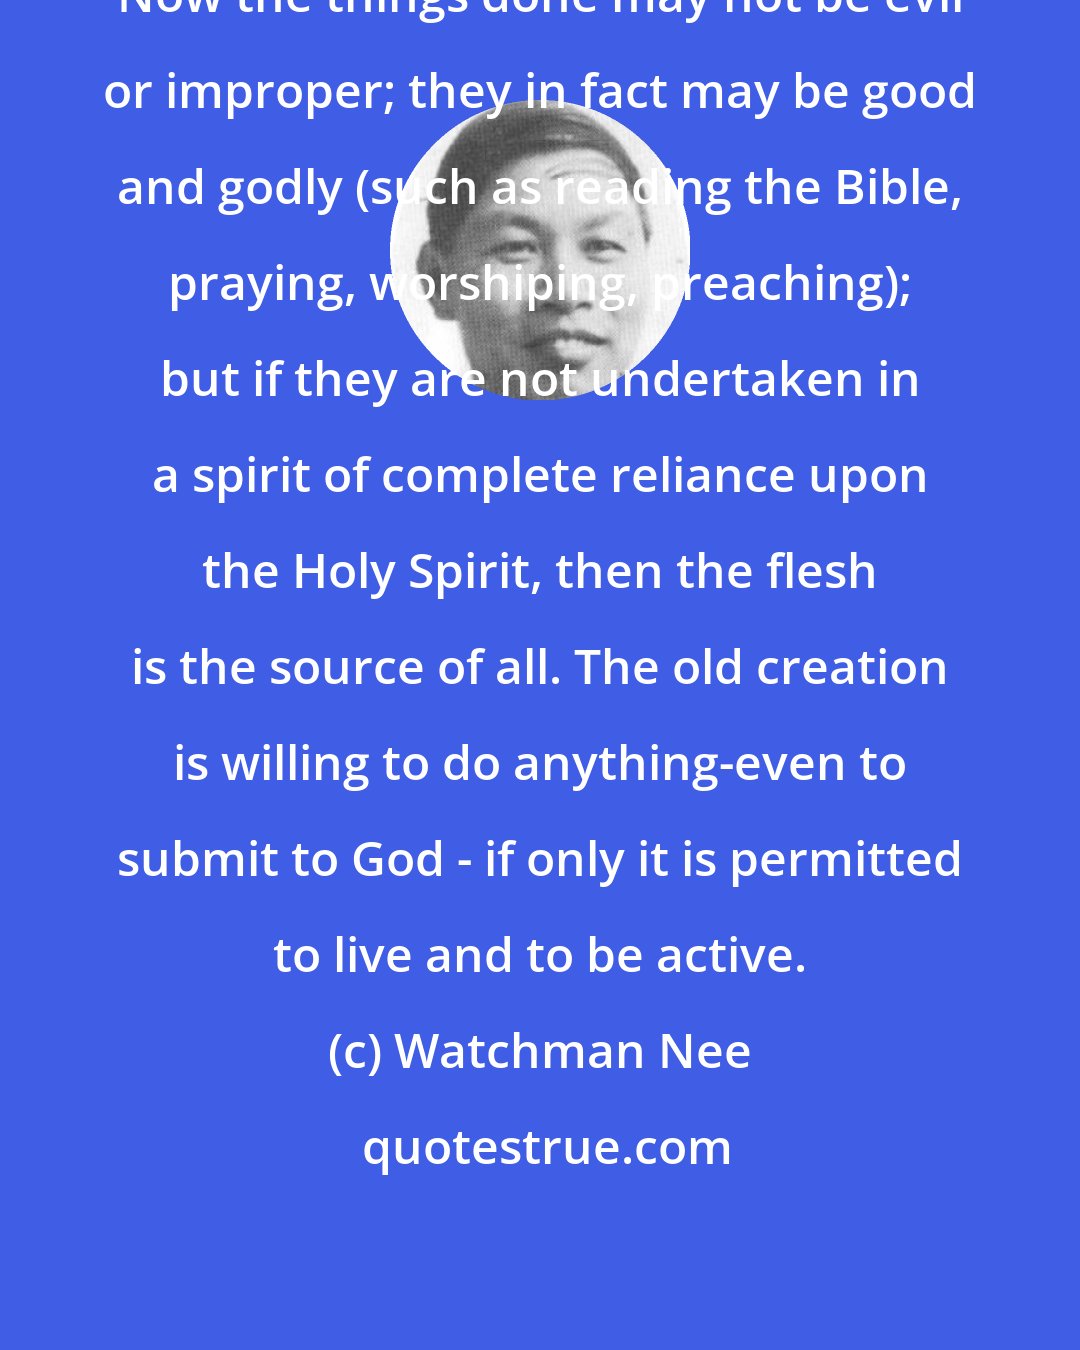 Watchman Nee: Now the things done may not be evil or improper; they in fact may be good and godly (such as reading the Bible, praying, worshiping, preaching); but if they are not undertaken in a spirit of complete reliance upon the Holy Spirit, then the flesh is the source of all. The old creation is willing to do anything-even to submit to God - if only it is permitted to live and to be active.